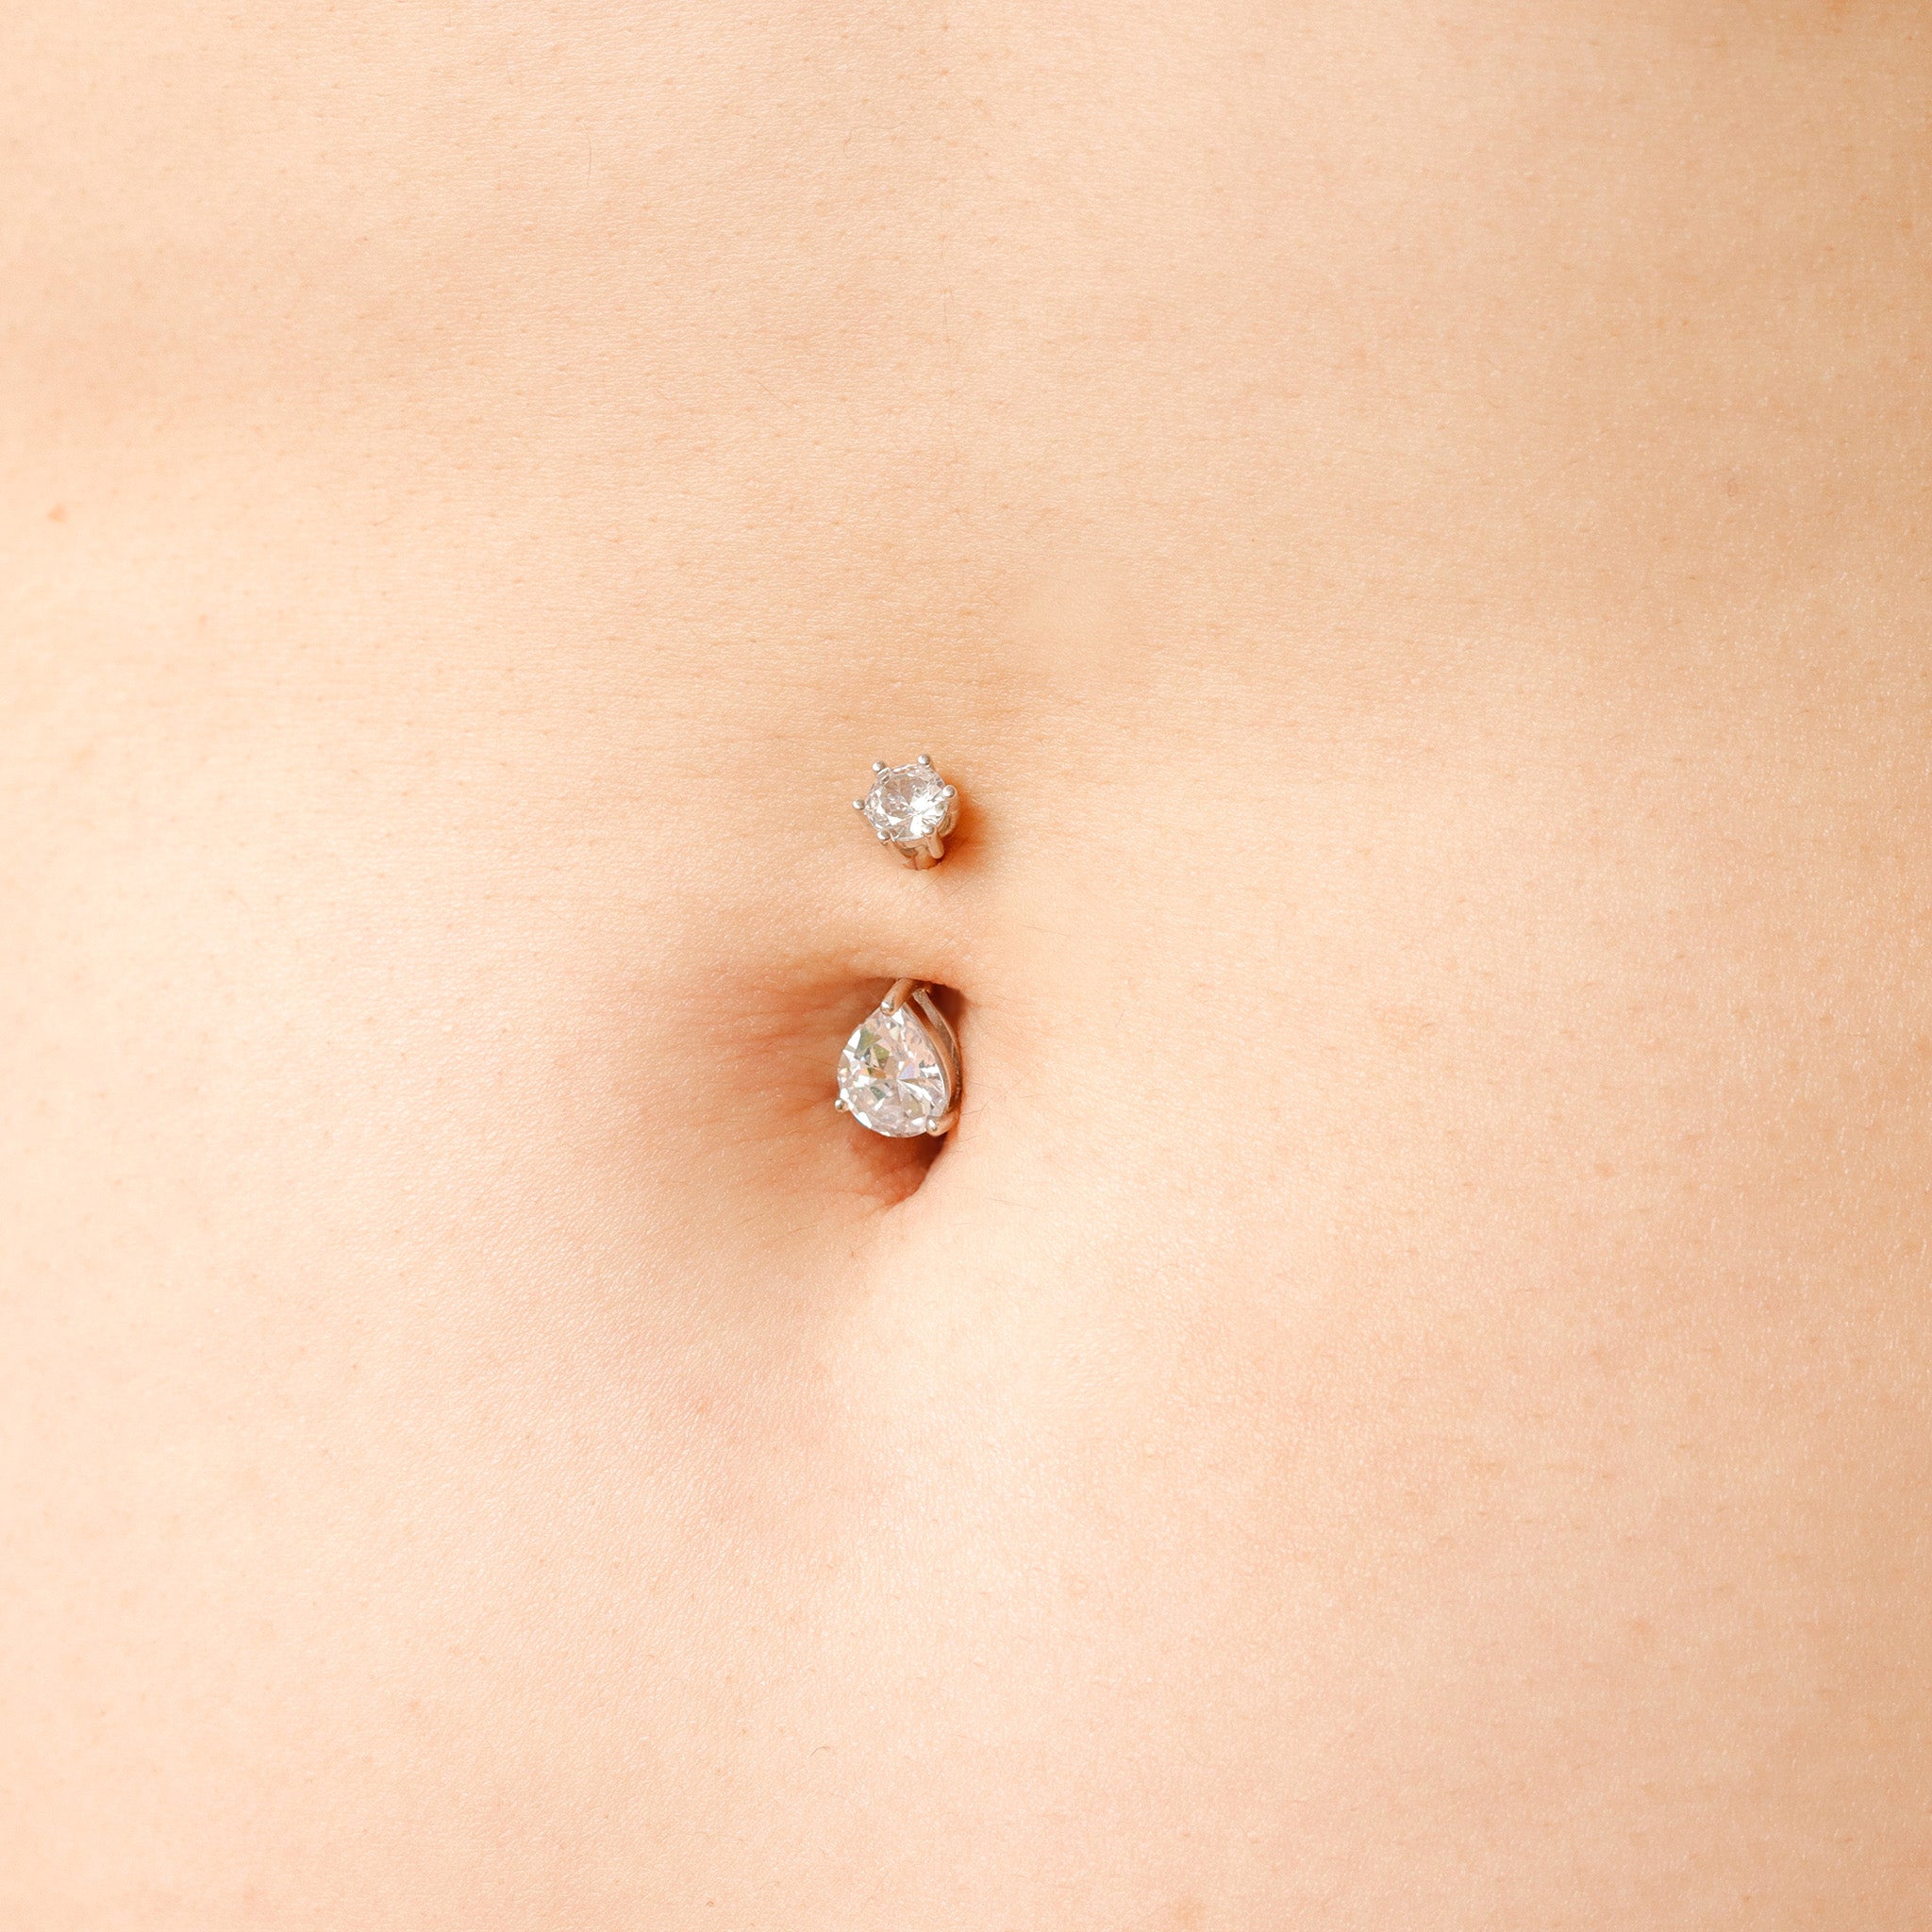 Amazon.com: Dainty Belly Button Ring 20 Gauge White Opal - 14k Gold Filled  Belly Hoop Piercing - Belly Jewelry For Women Men - Handmade Body Jewelry :  Handmade Products